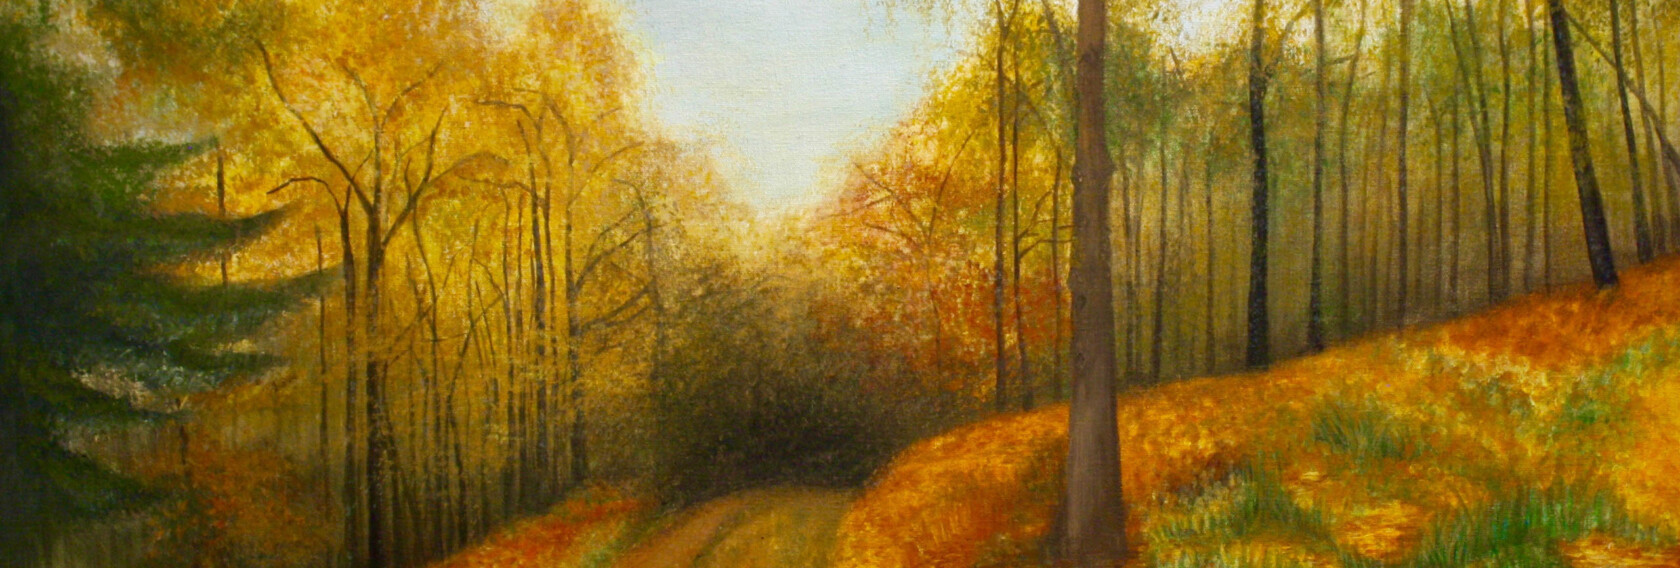 A painting of fall foliage.